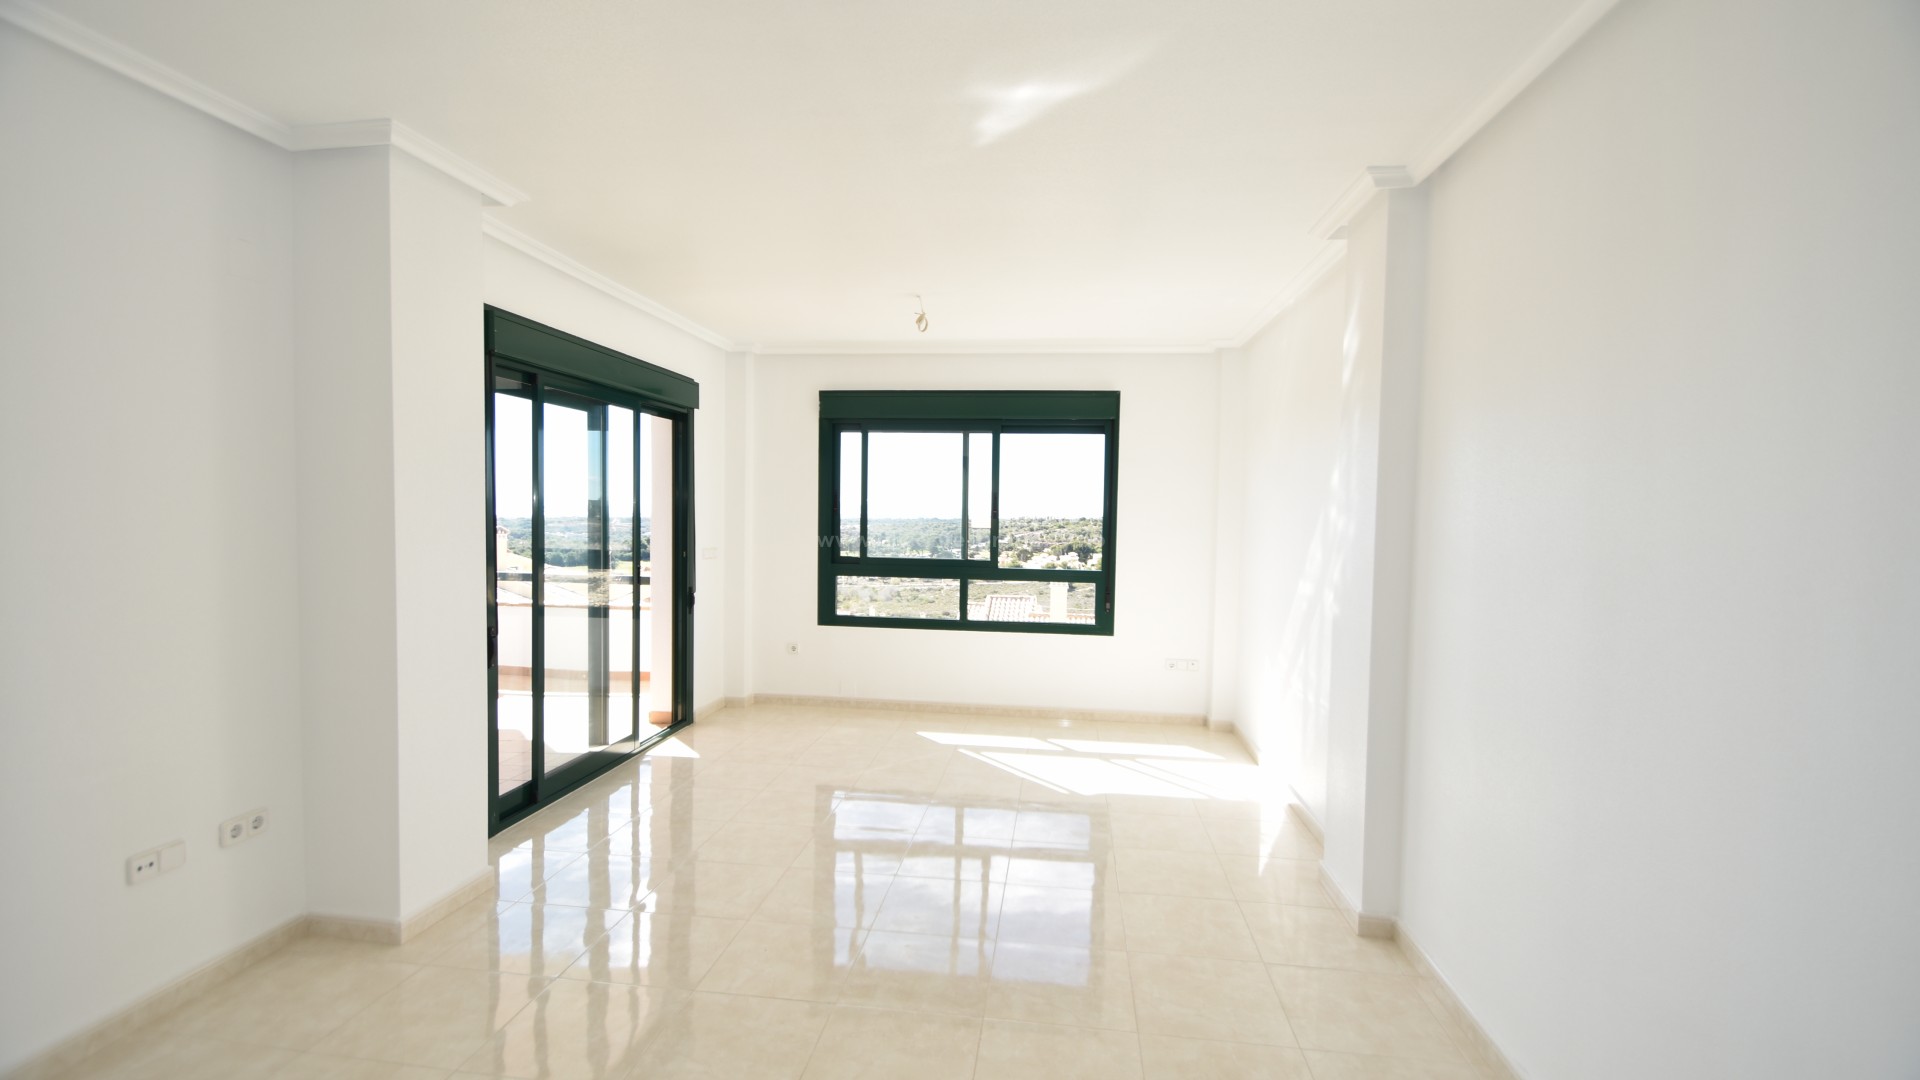 Apartment / flat in Campoamor